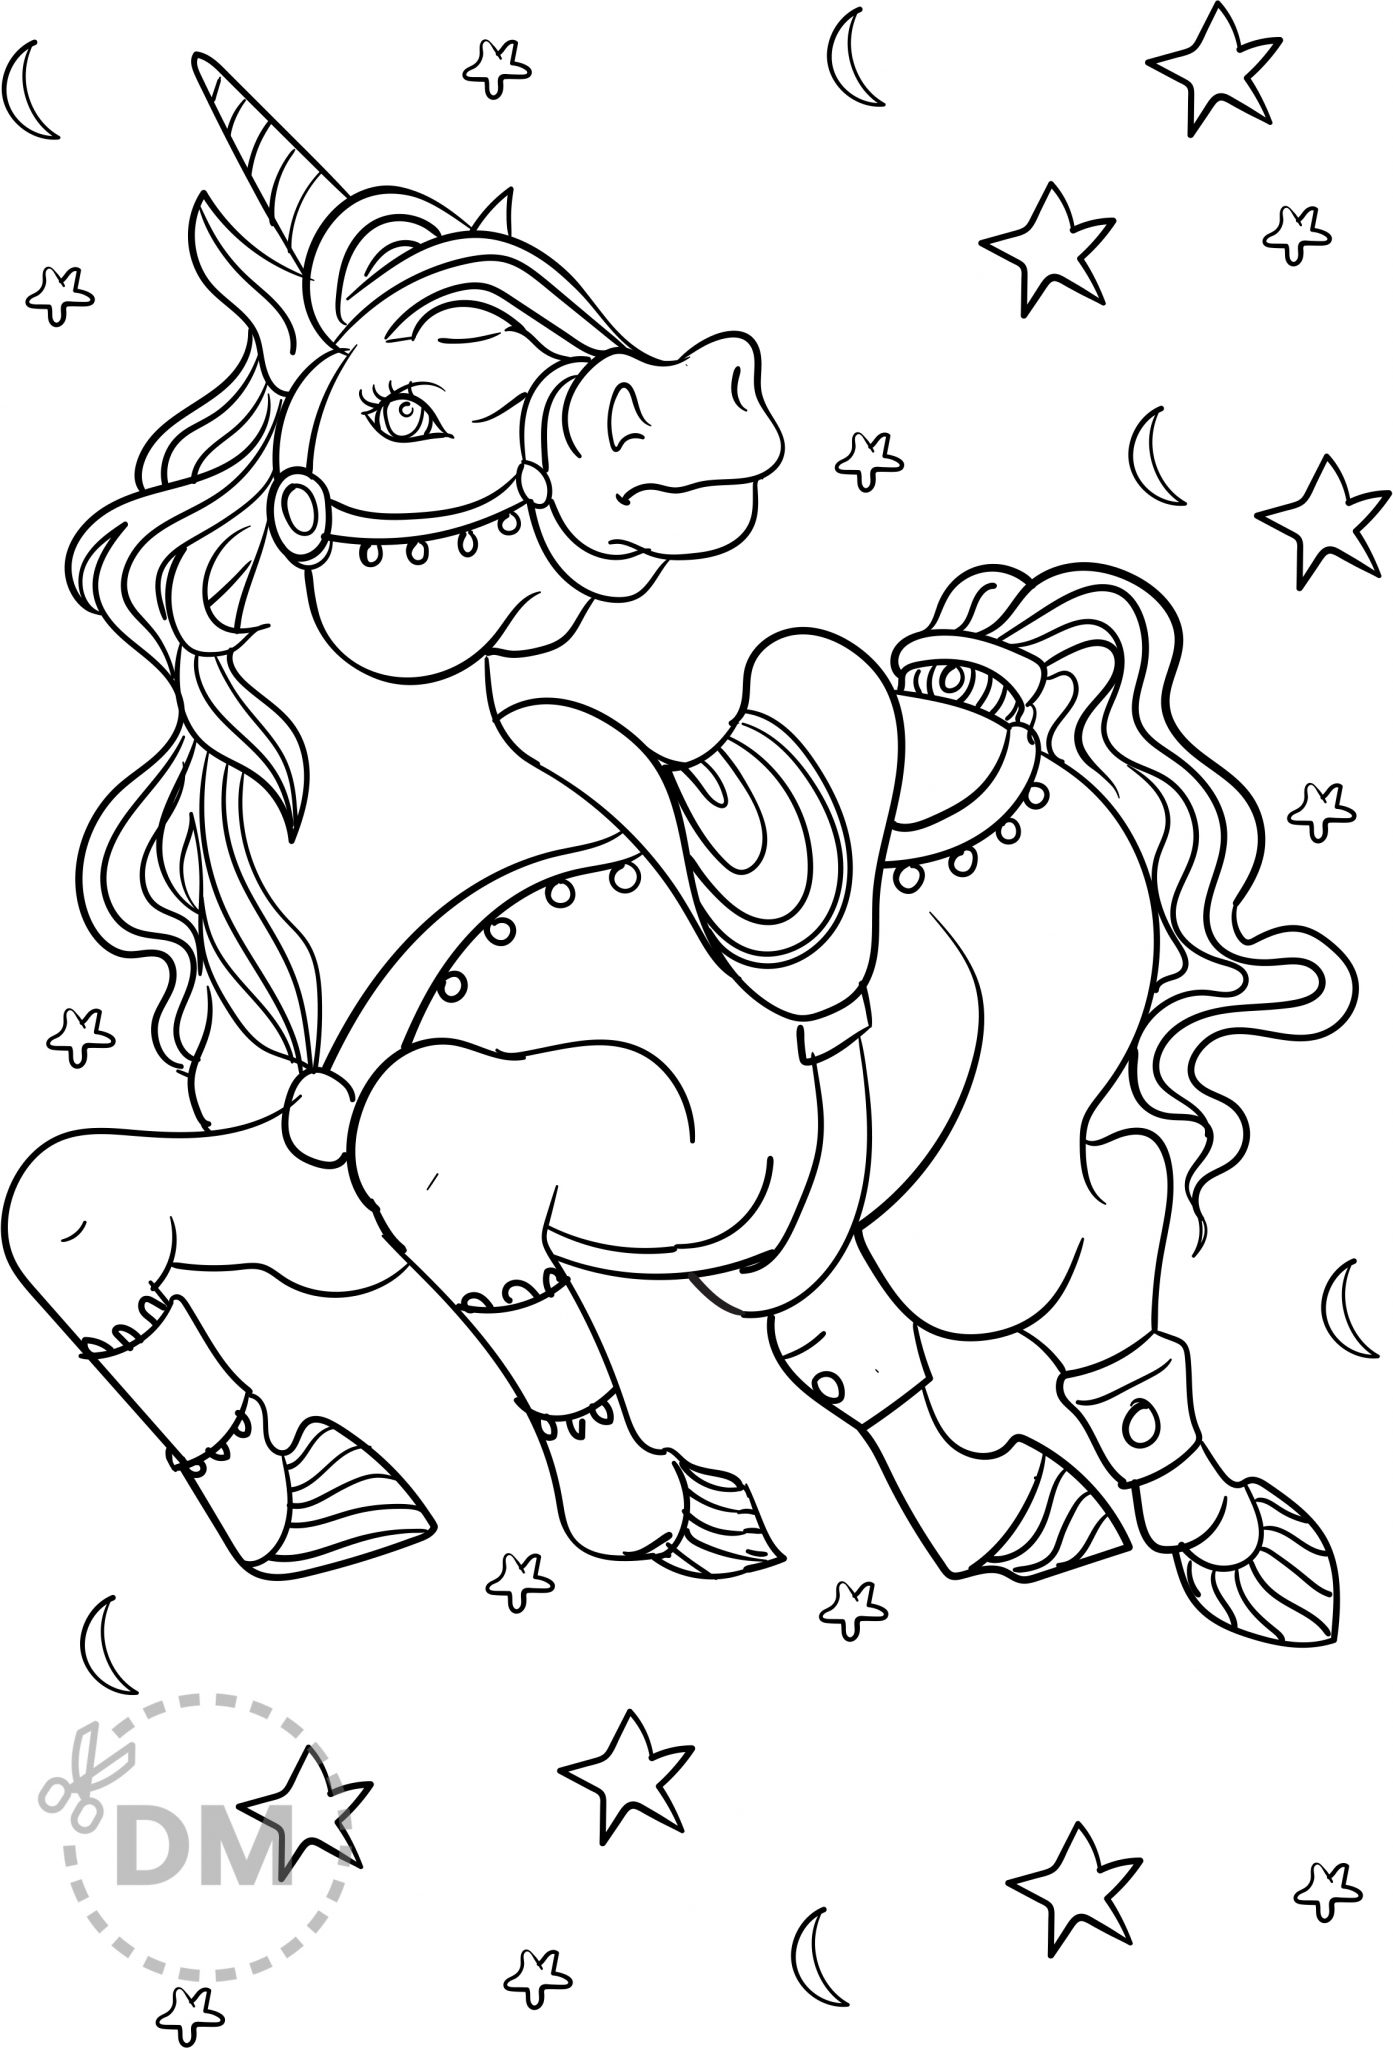 Small Unicorn Coloring Page To Color For Fun and Relaxation - diy